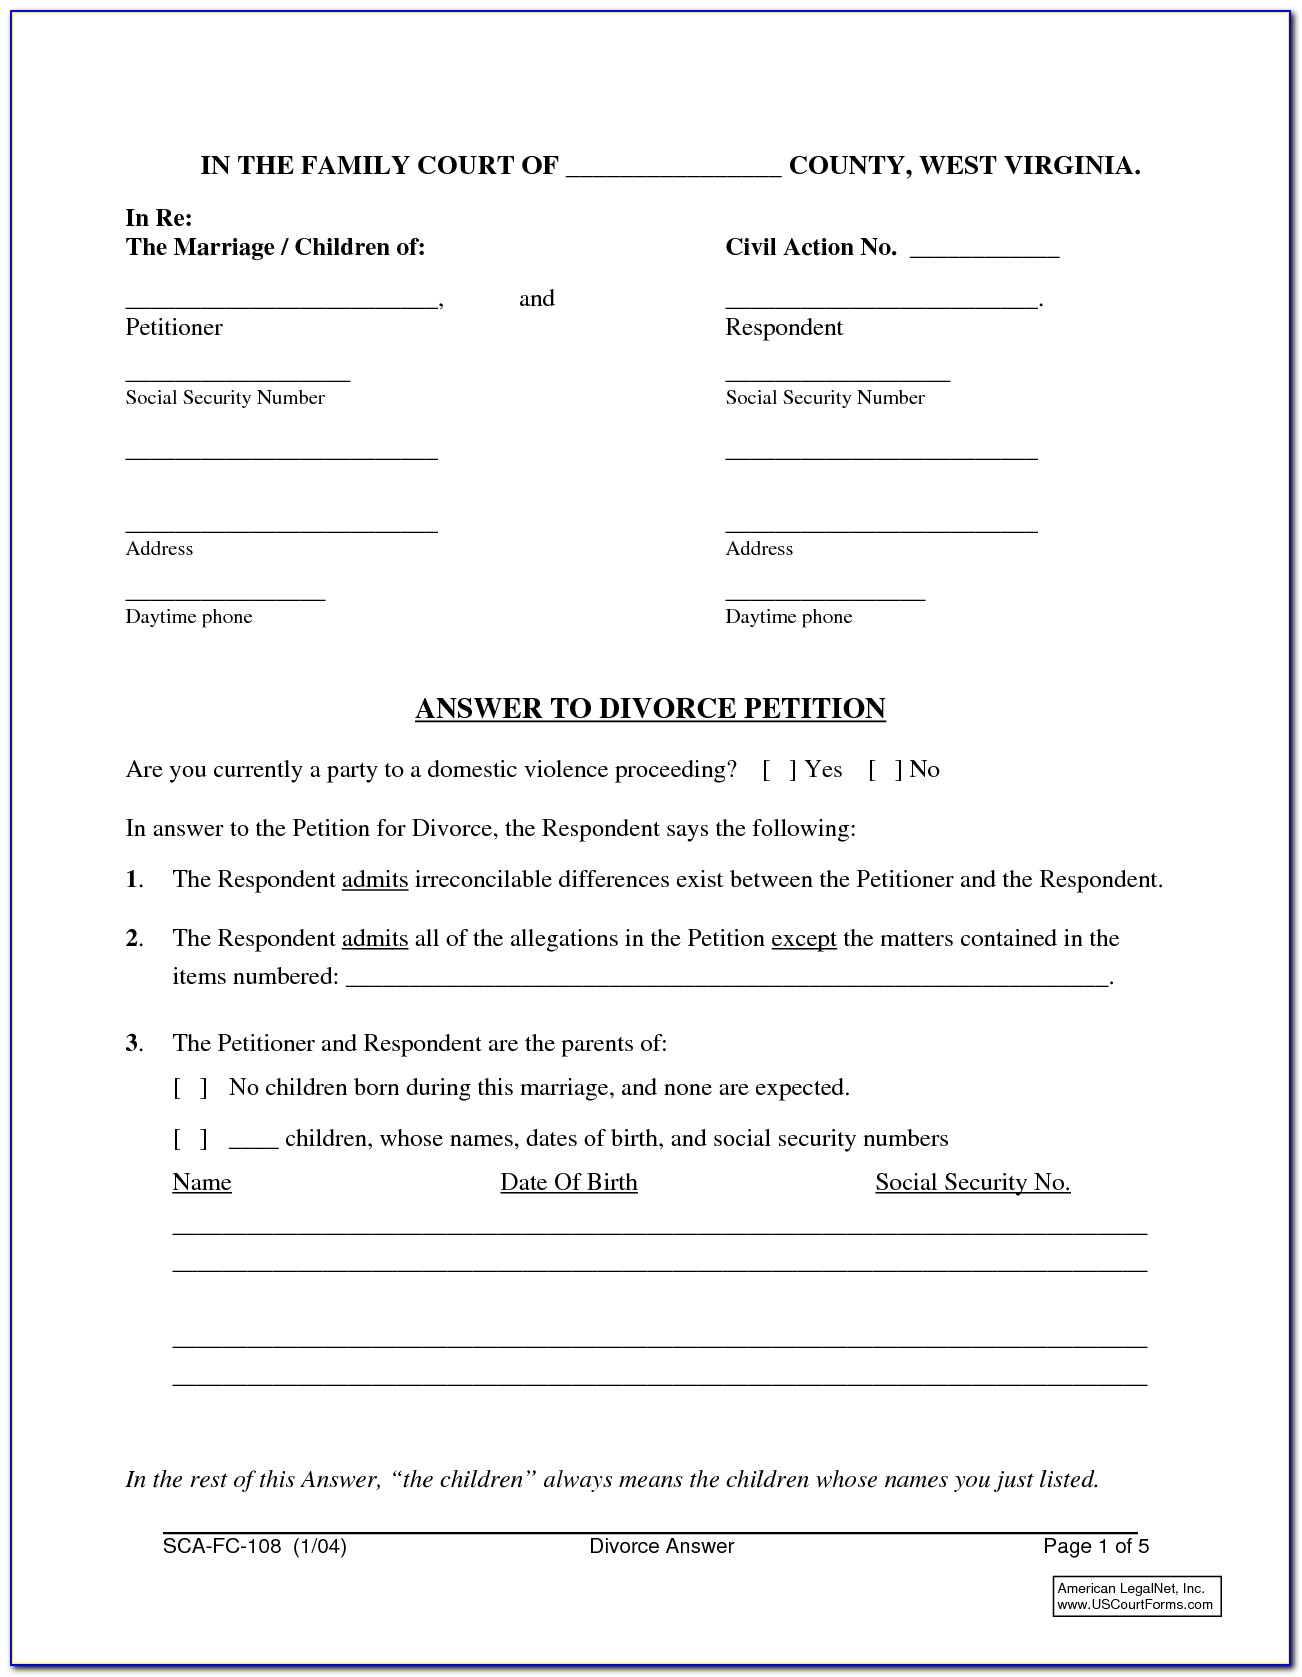 free-printable-divorce-forms-for-texas-printable-forms-free-online